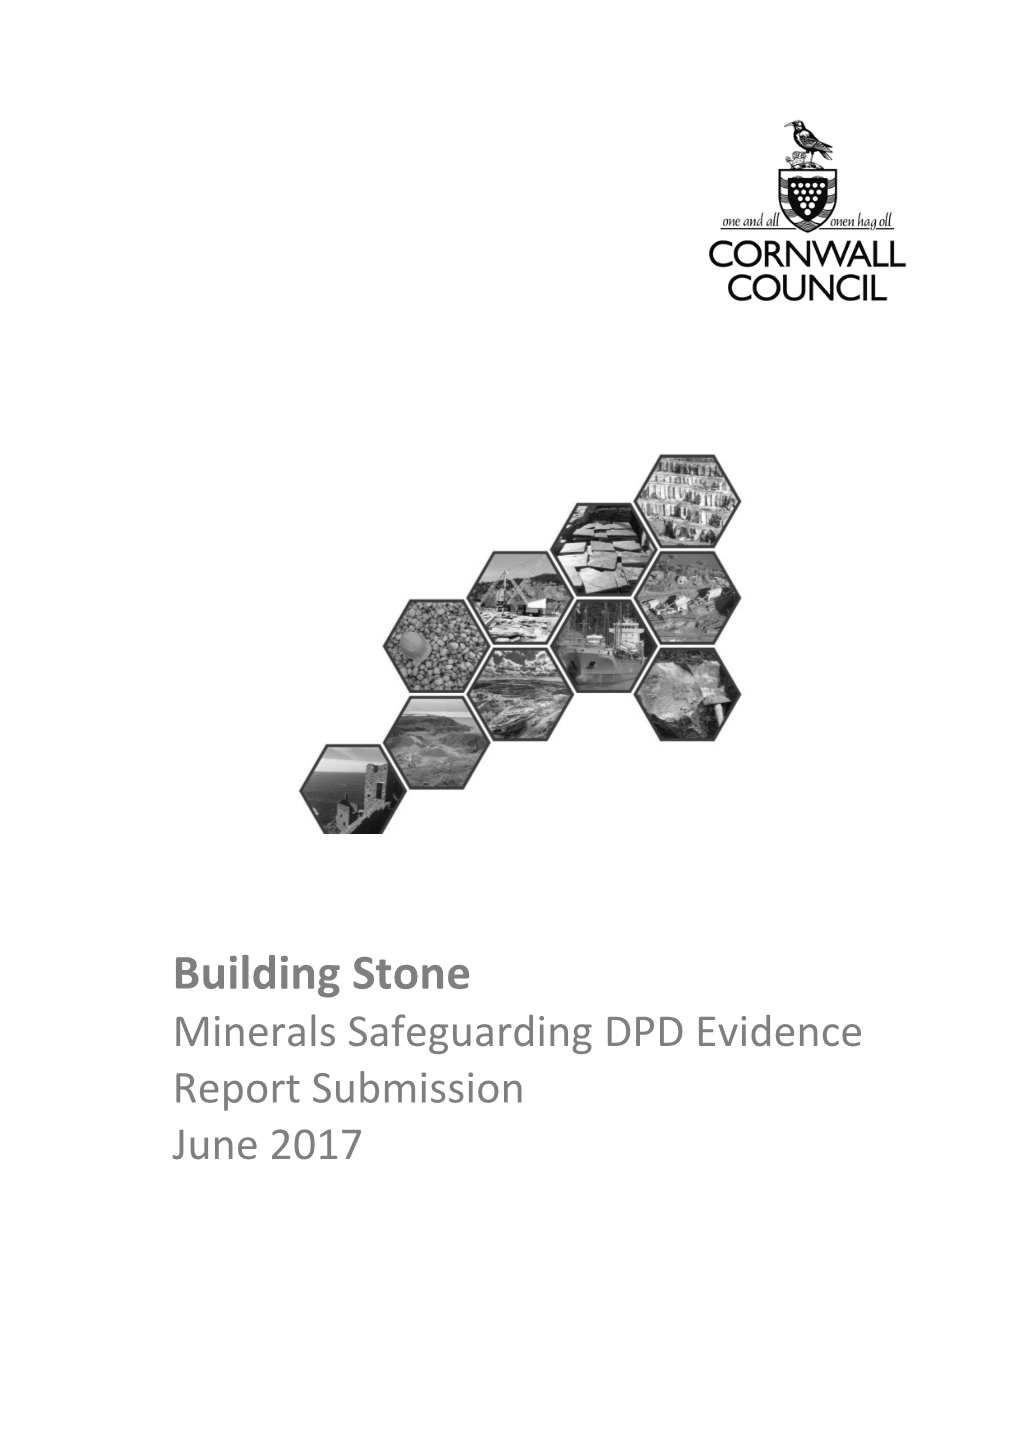 Building Stone Minerals Safeguarding DPD Evidence Report Submission June 2017